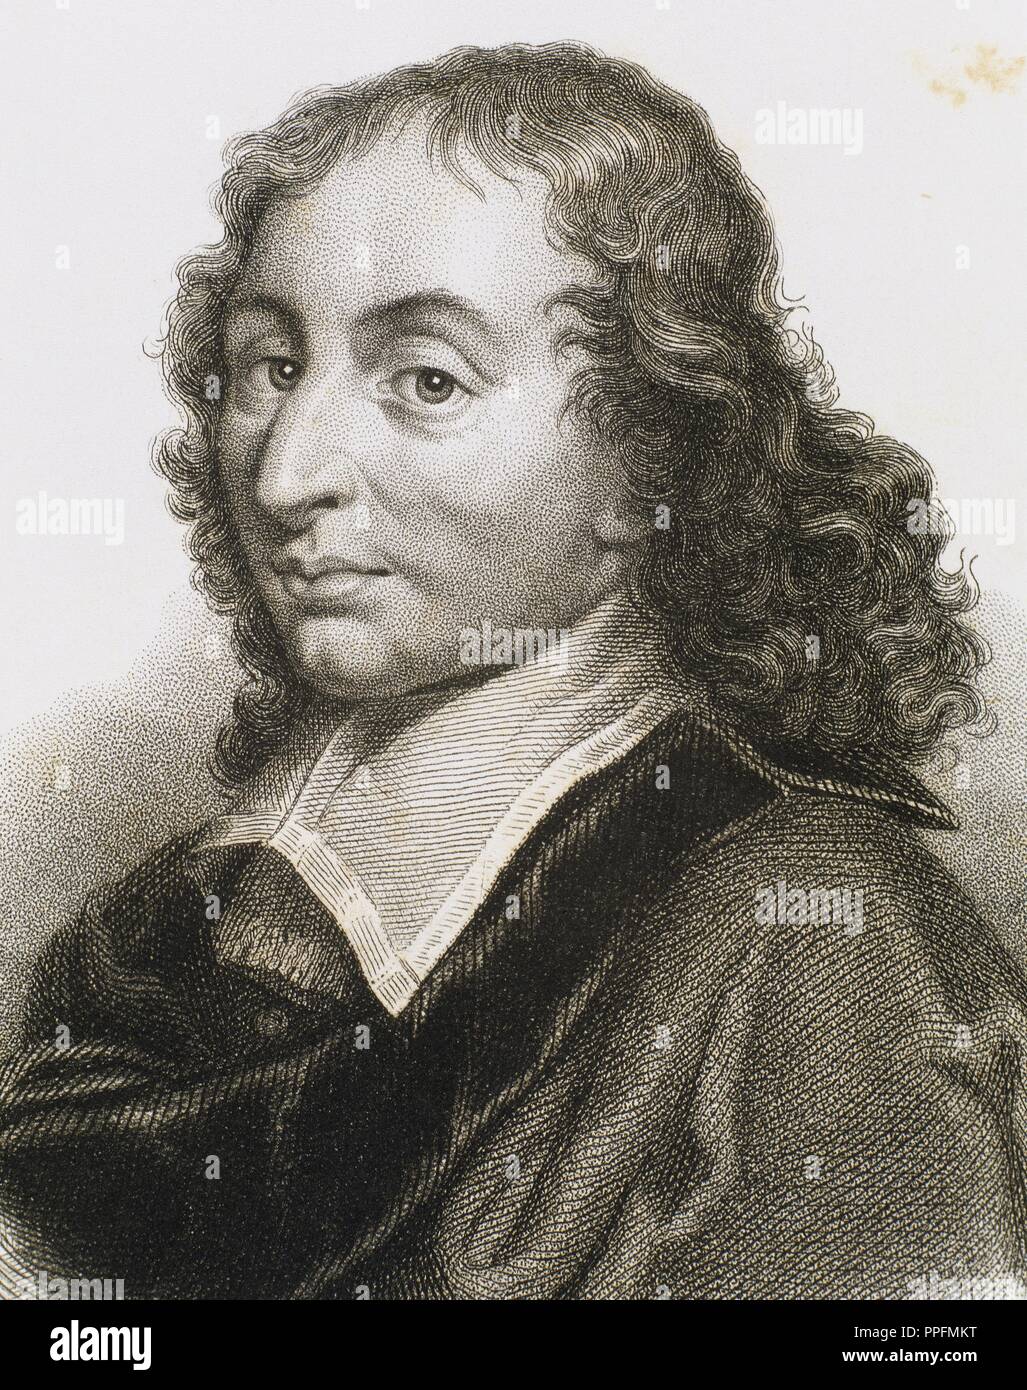 PASCAL, Blaise (Clermont-Ferrand, 1623-Paris, 1662) French philosopher and writer. He conducted studies on the weight of air and vacuum. Defender of the Jansenists. ENGRAVING. Stock Photo